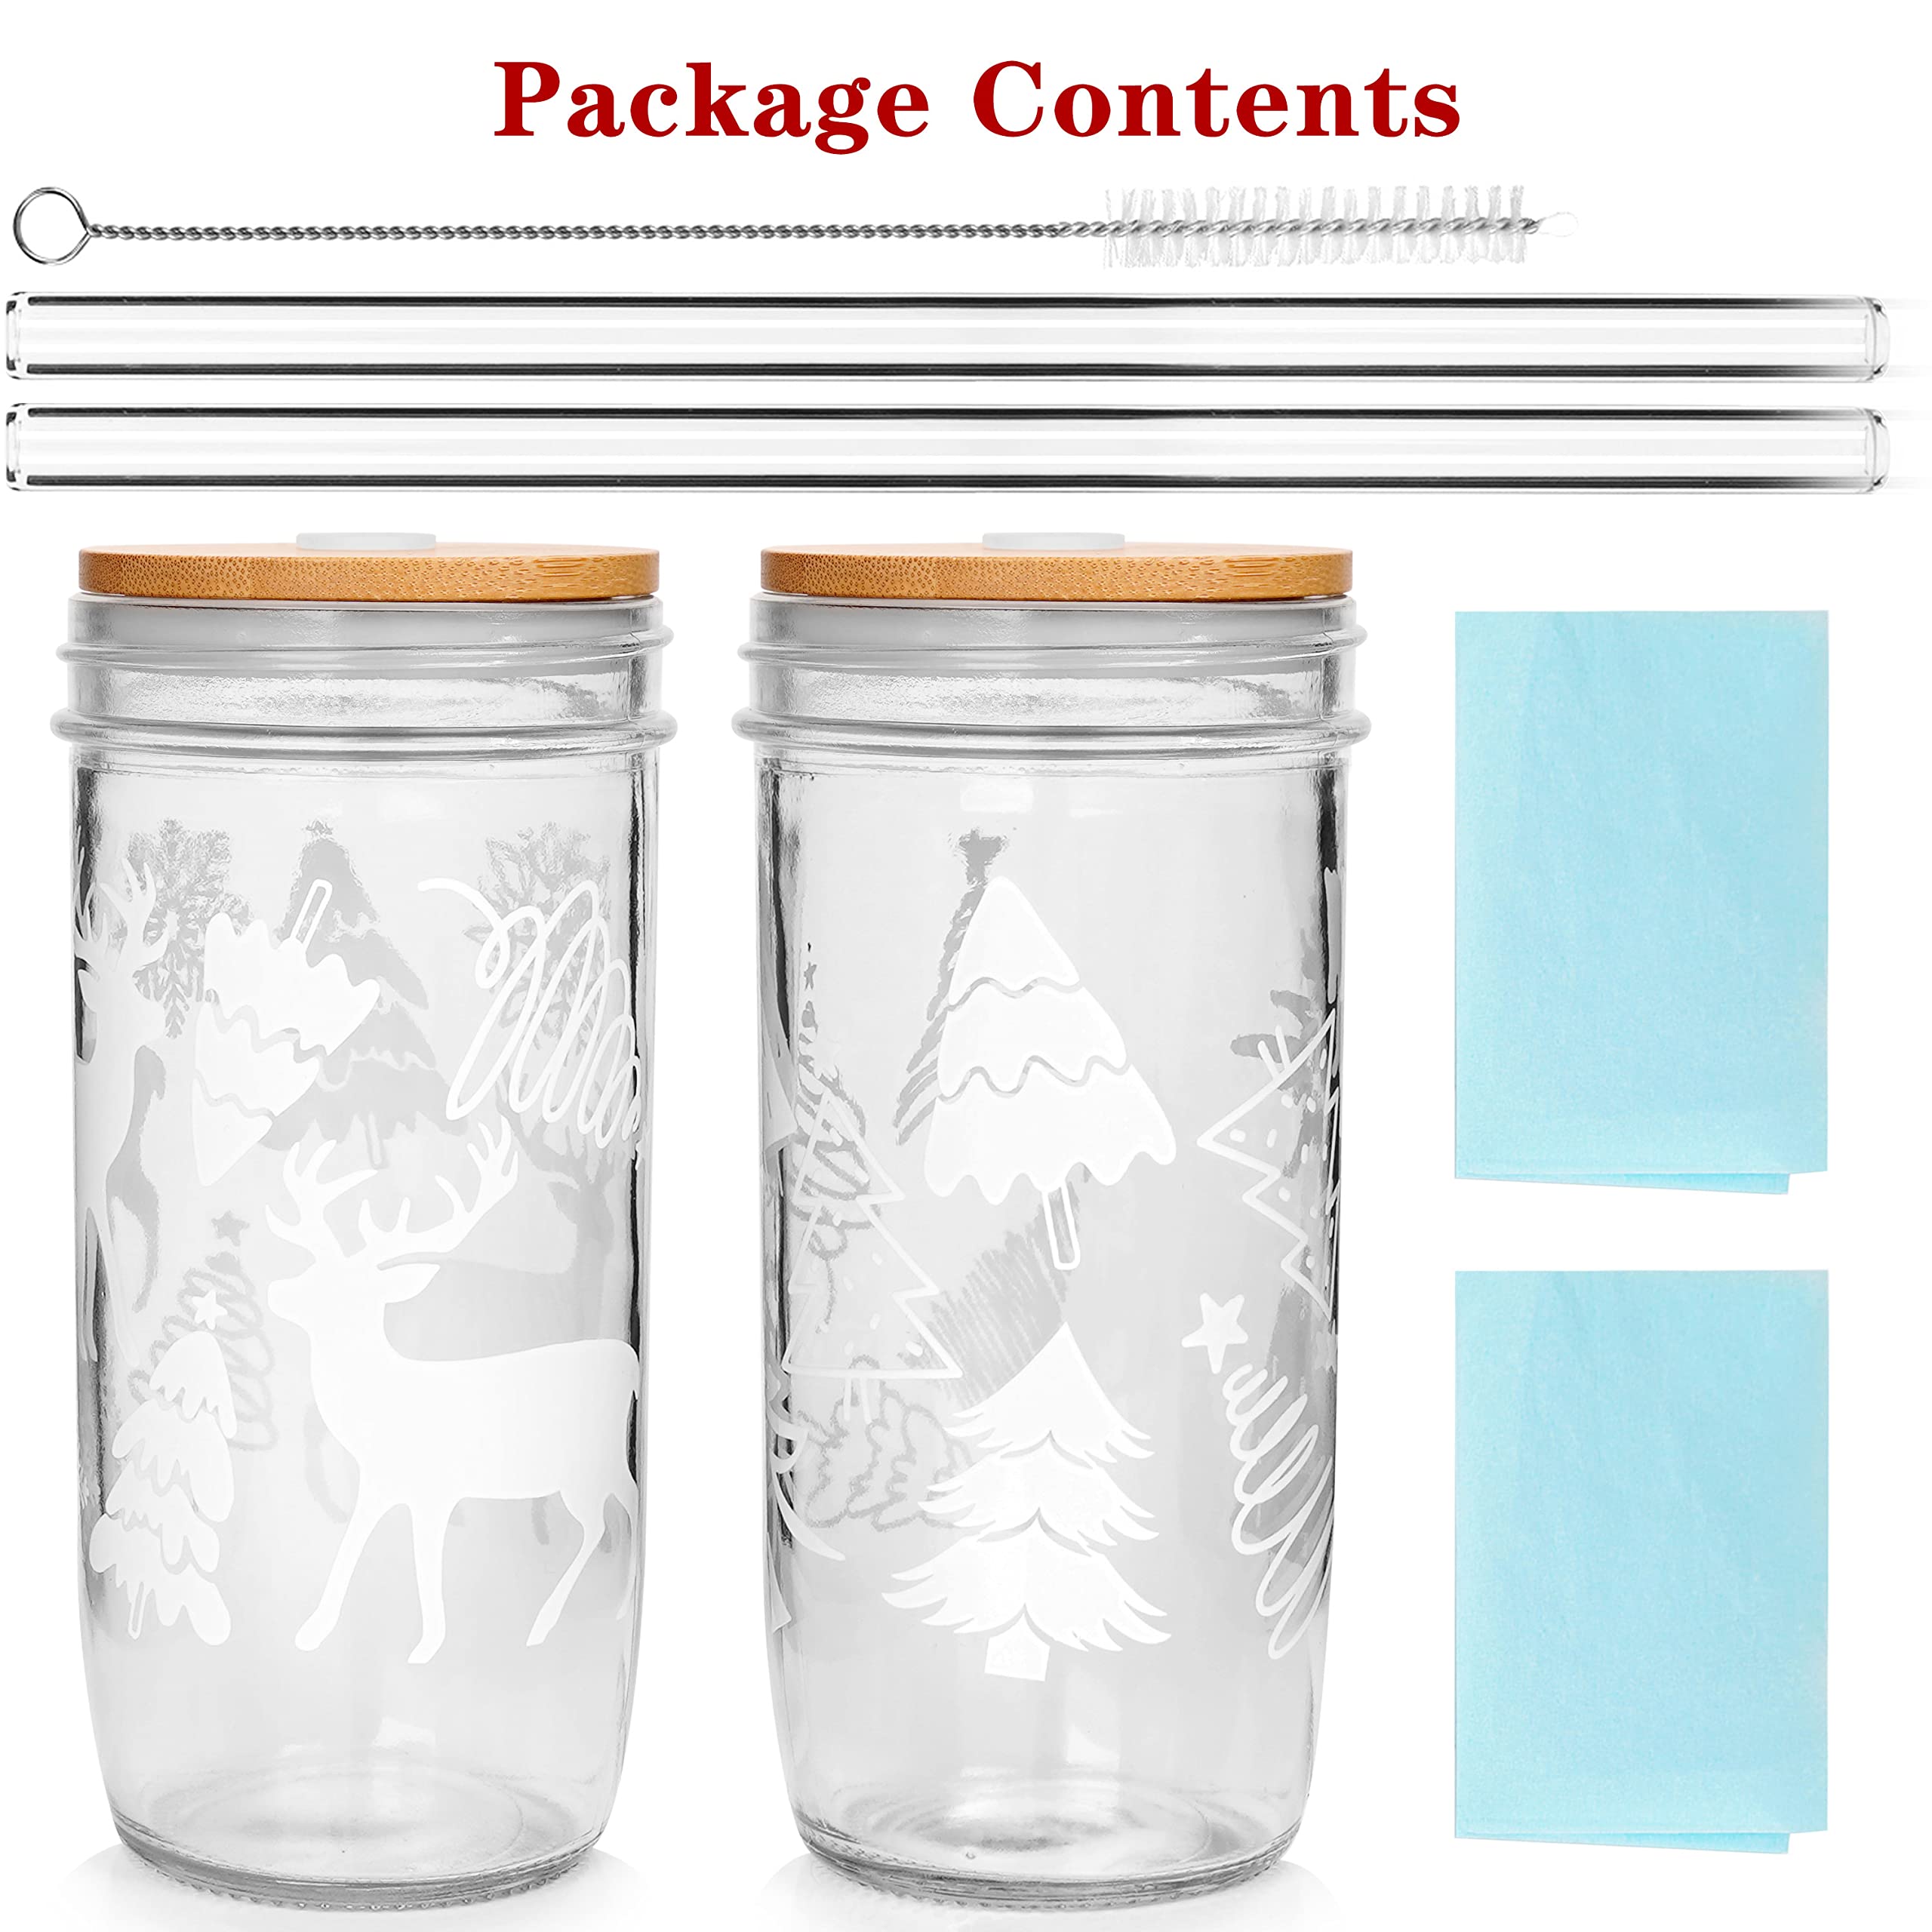 ANOTION Useful White Elephant Gifts for Adults Holiday 24oz Christmas Mugs Mason Jars Glass Cups with Lid and Straw Tumbler Drinking Glasses Coffee Cups Cookie Jar Glassware Gift for Women Men Mom